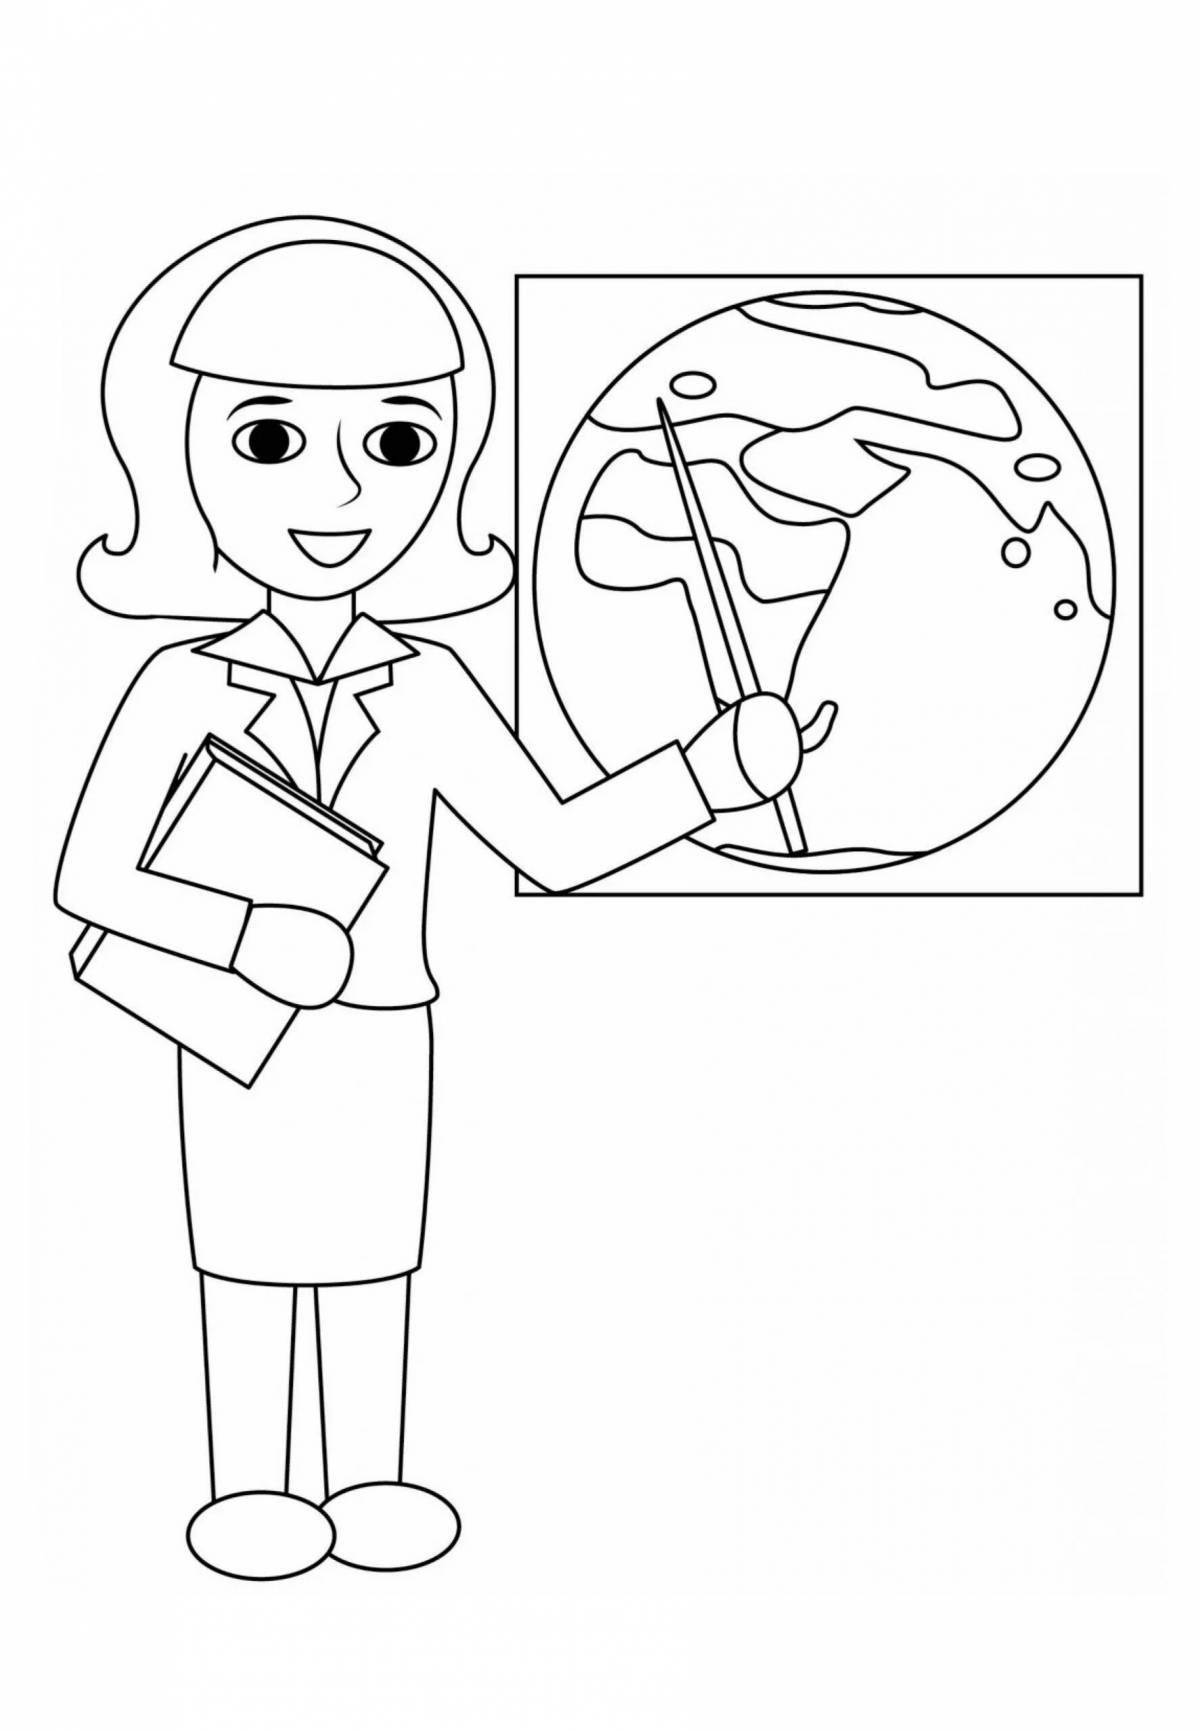 Radiant Tuesday 2022 Coloring Page